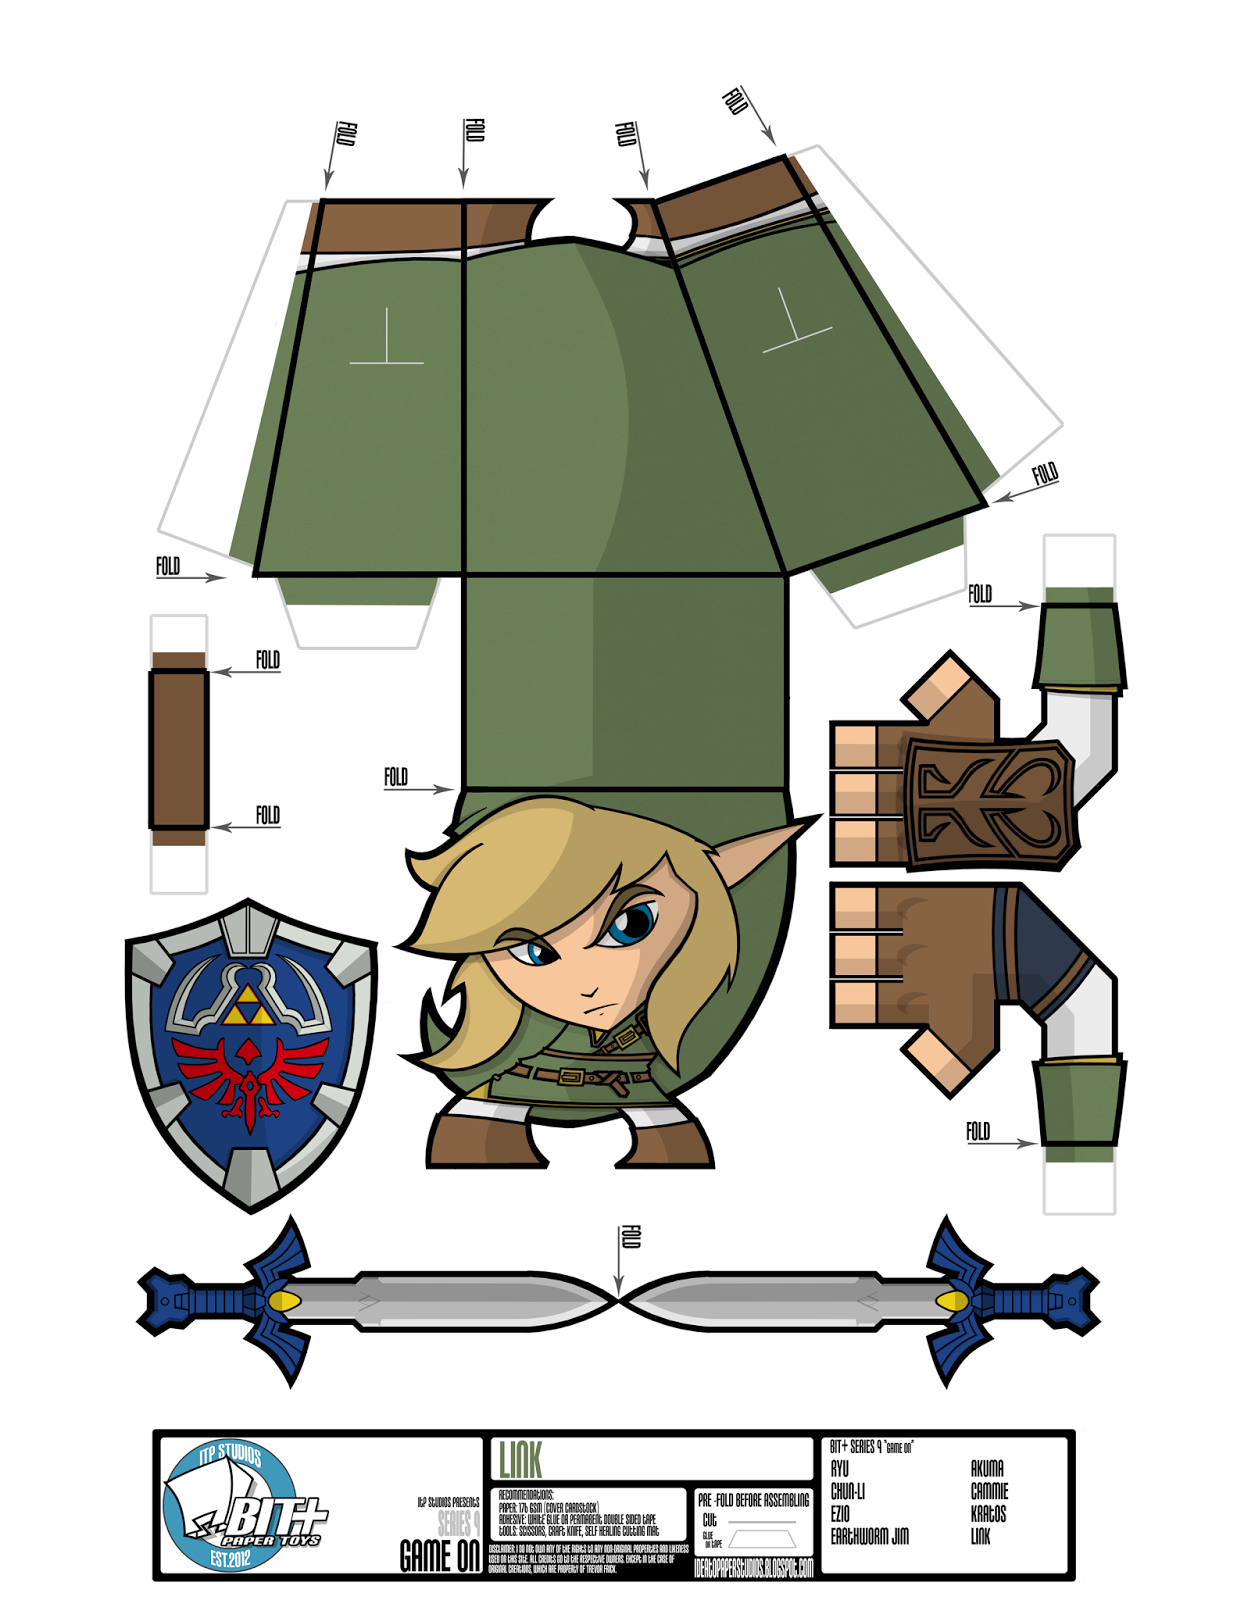 Bit paper toy series game on link released itp studios paper toys papercraft pokemon super mario coloring pages